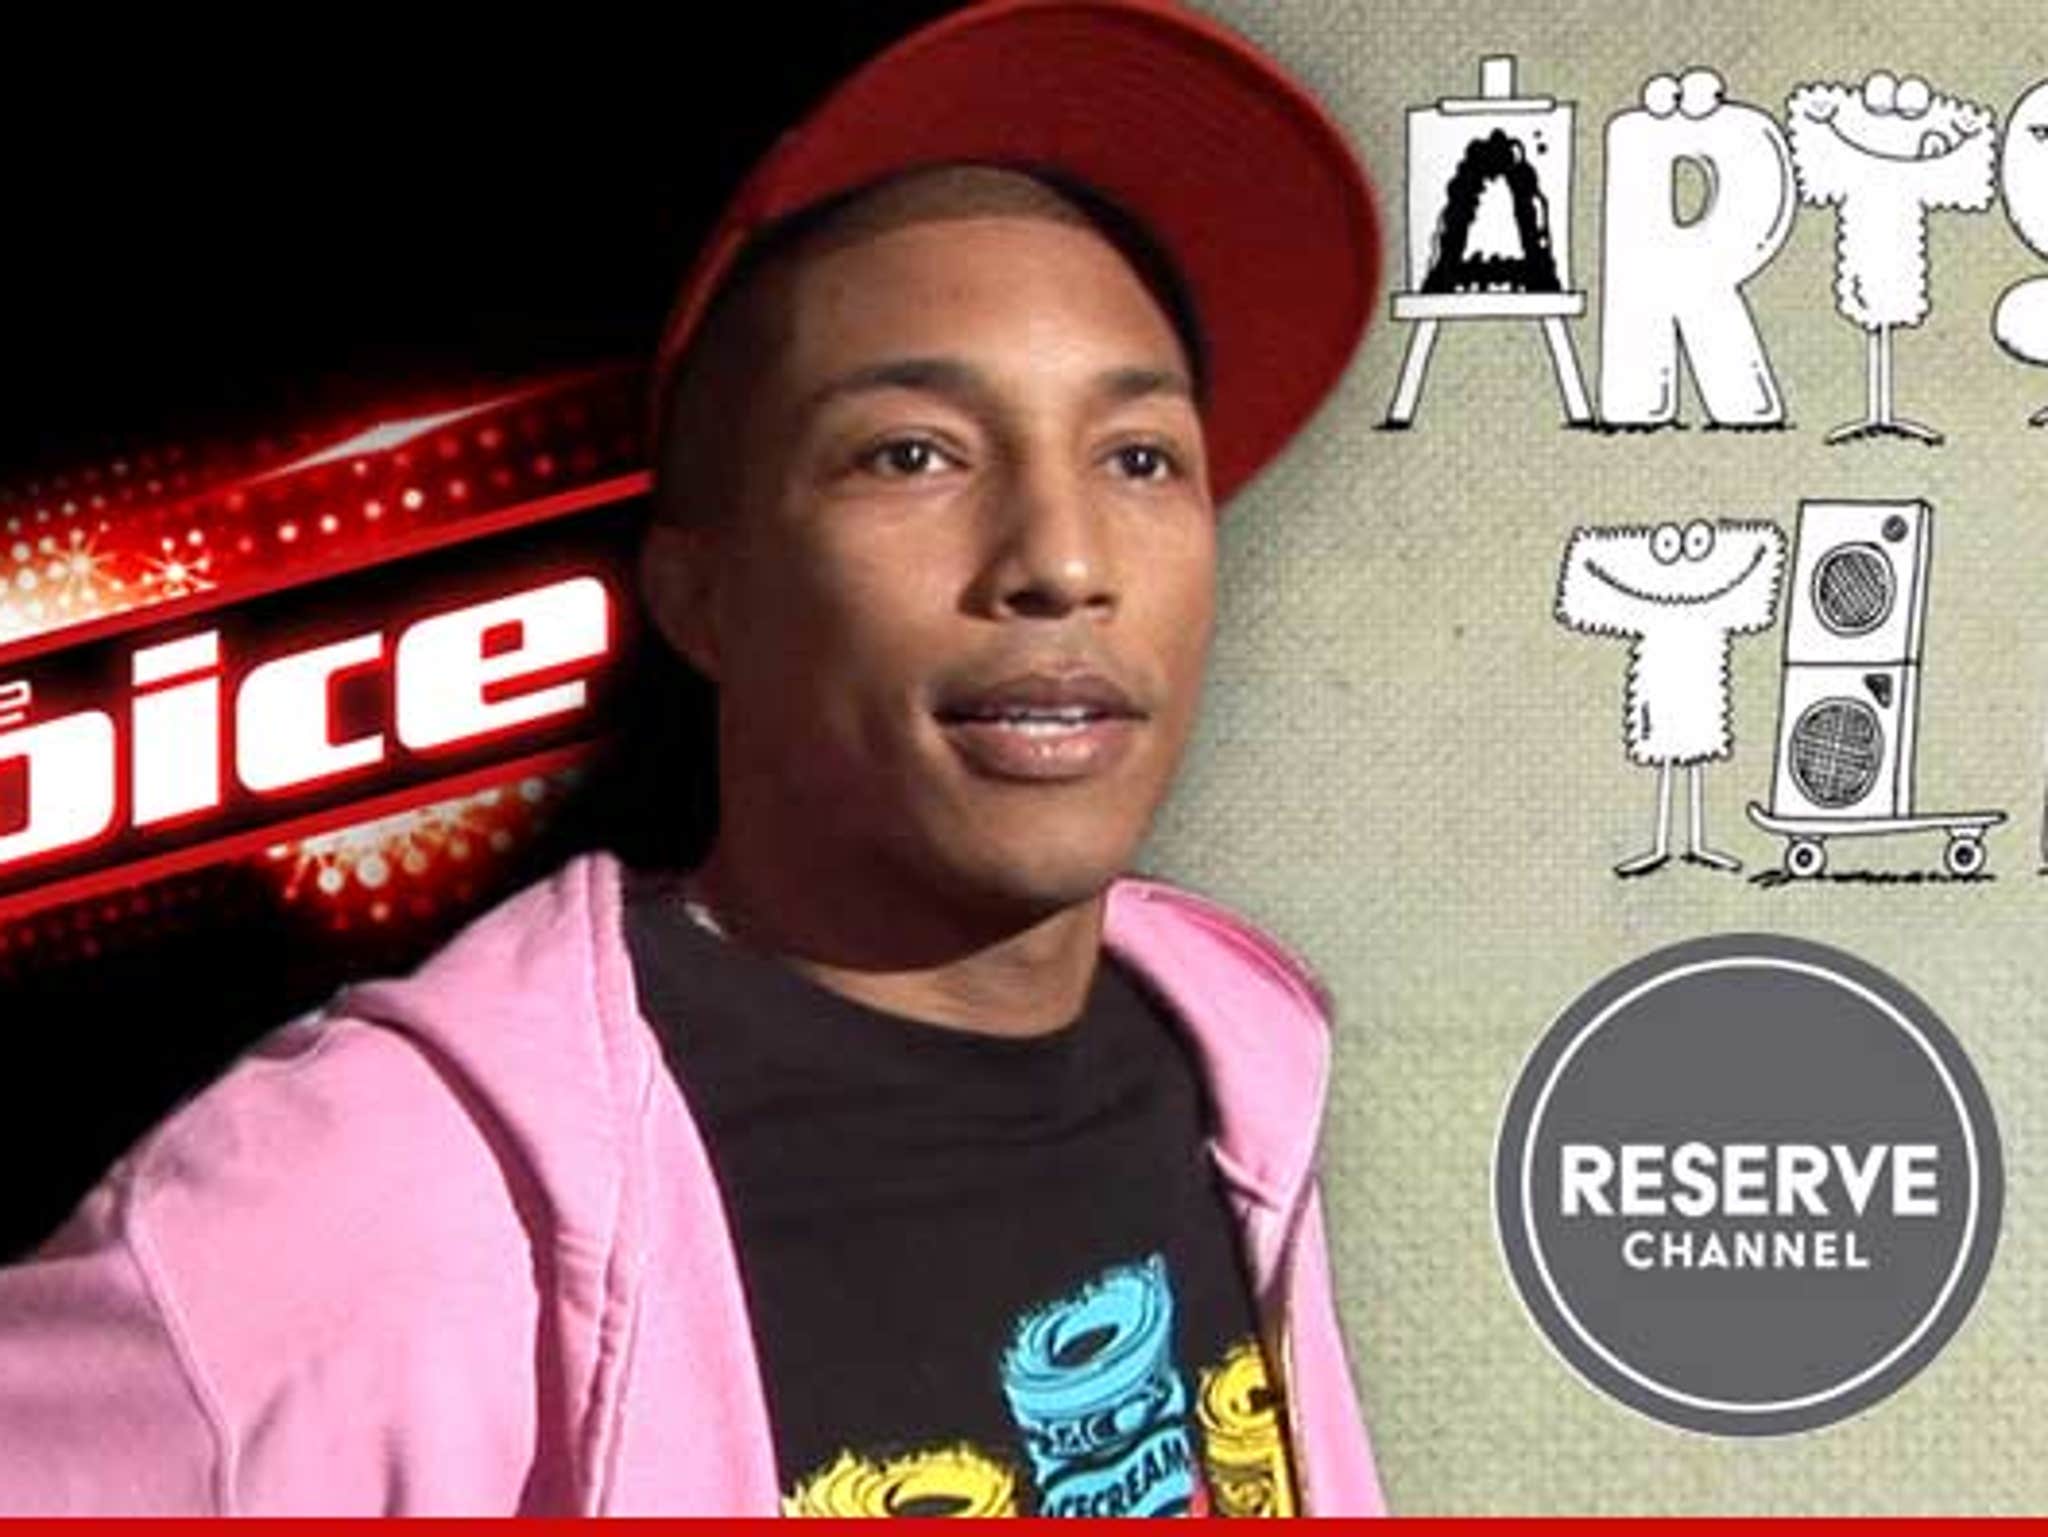 The Voice Judge Pharrell Williams's Hat Was Bought by a Friend